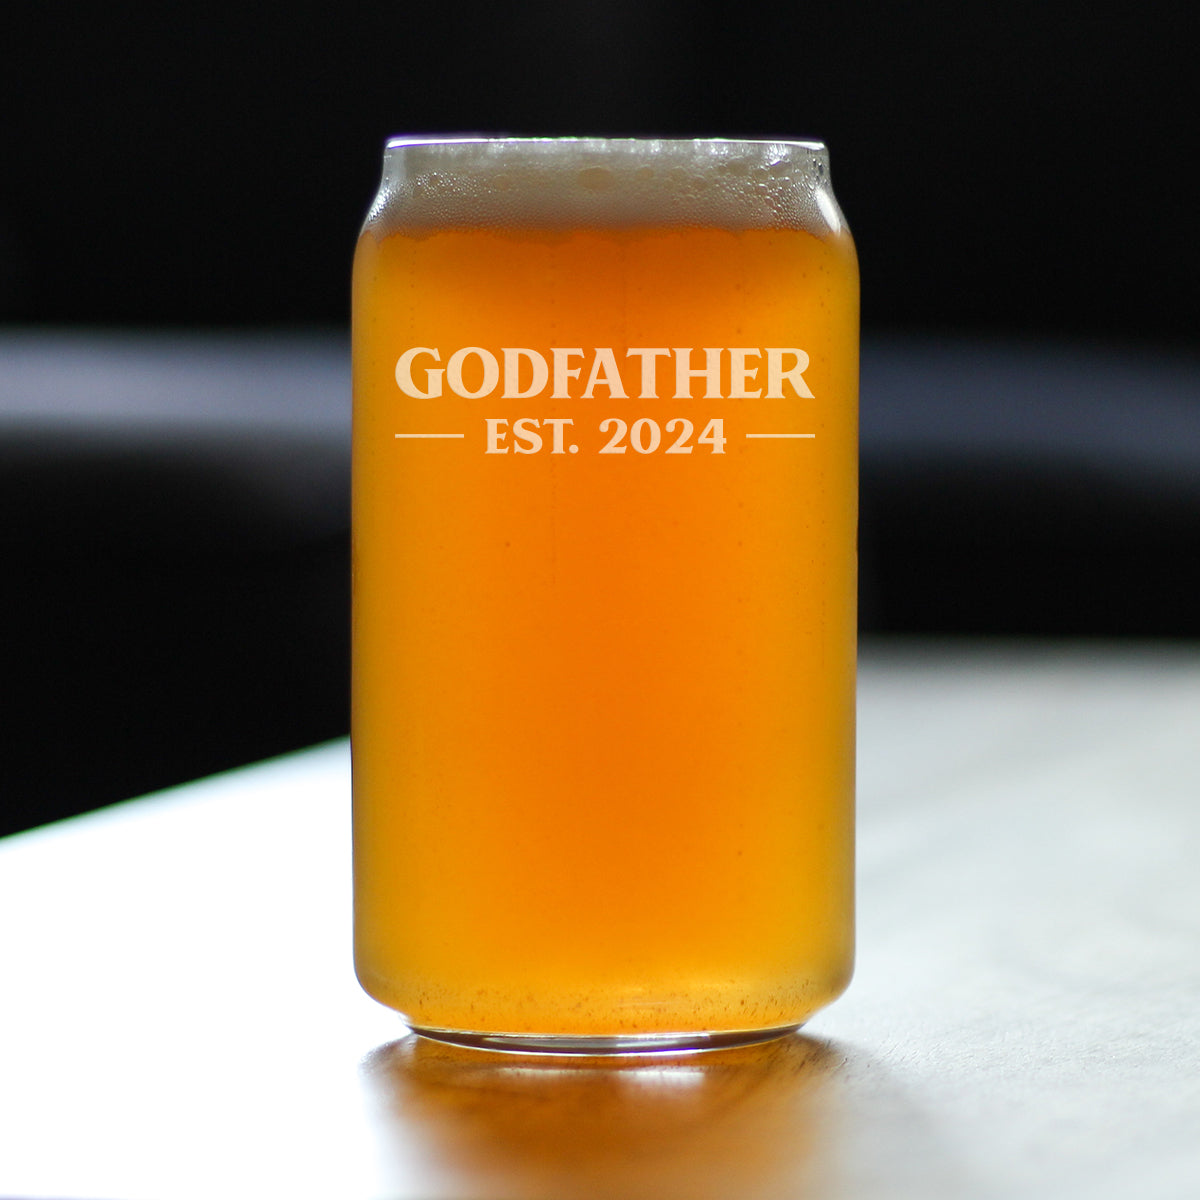 Godfather Est 2024 - New Godfather Beer Can Pint Glass Proposal Gift for First Time Godparents - Bold 16 Oz Glasses